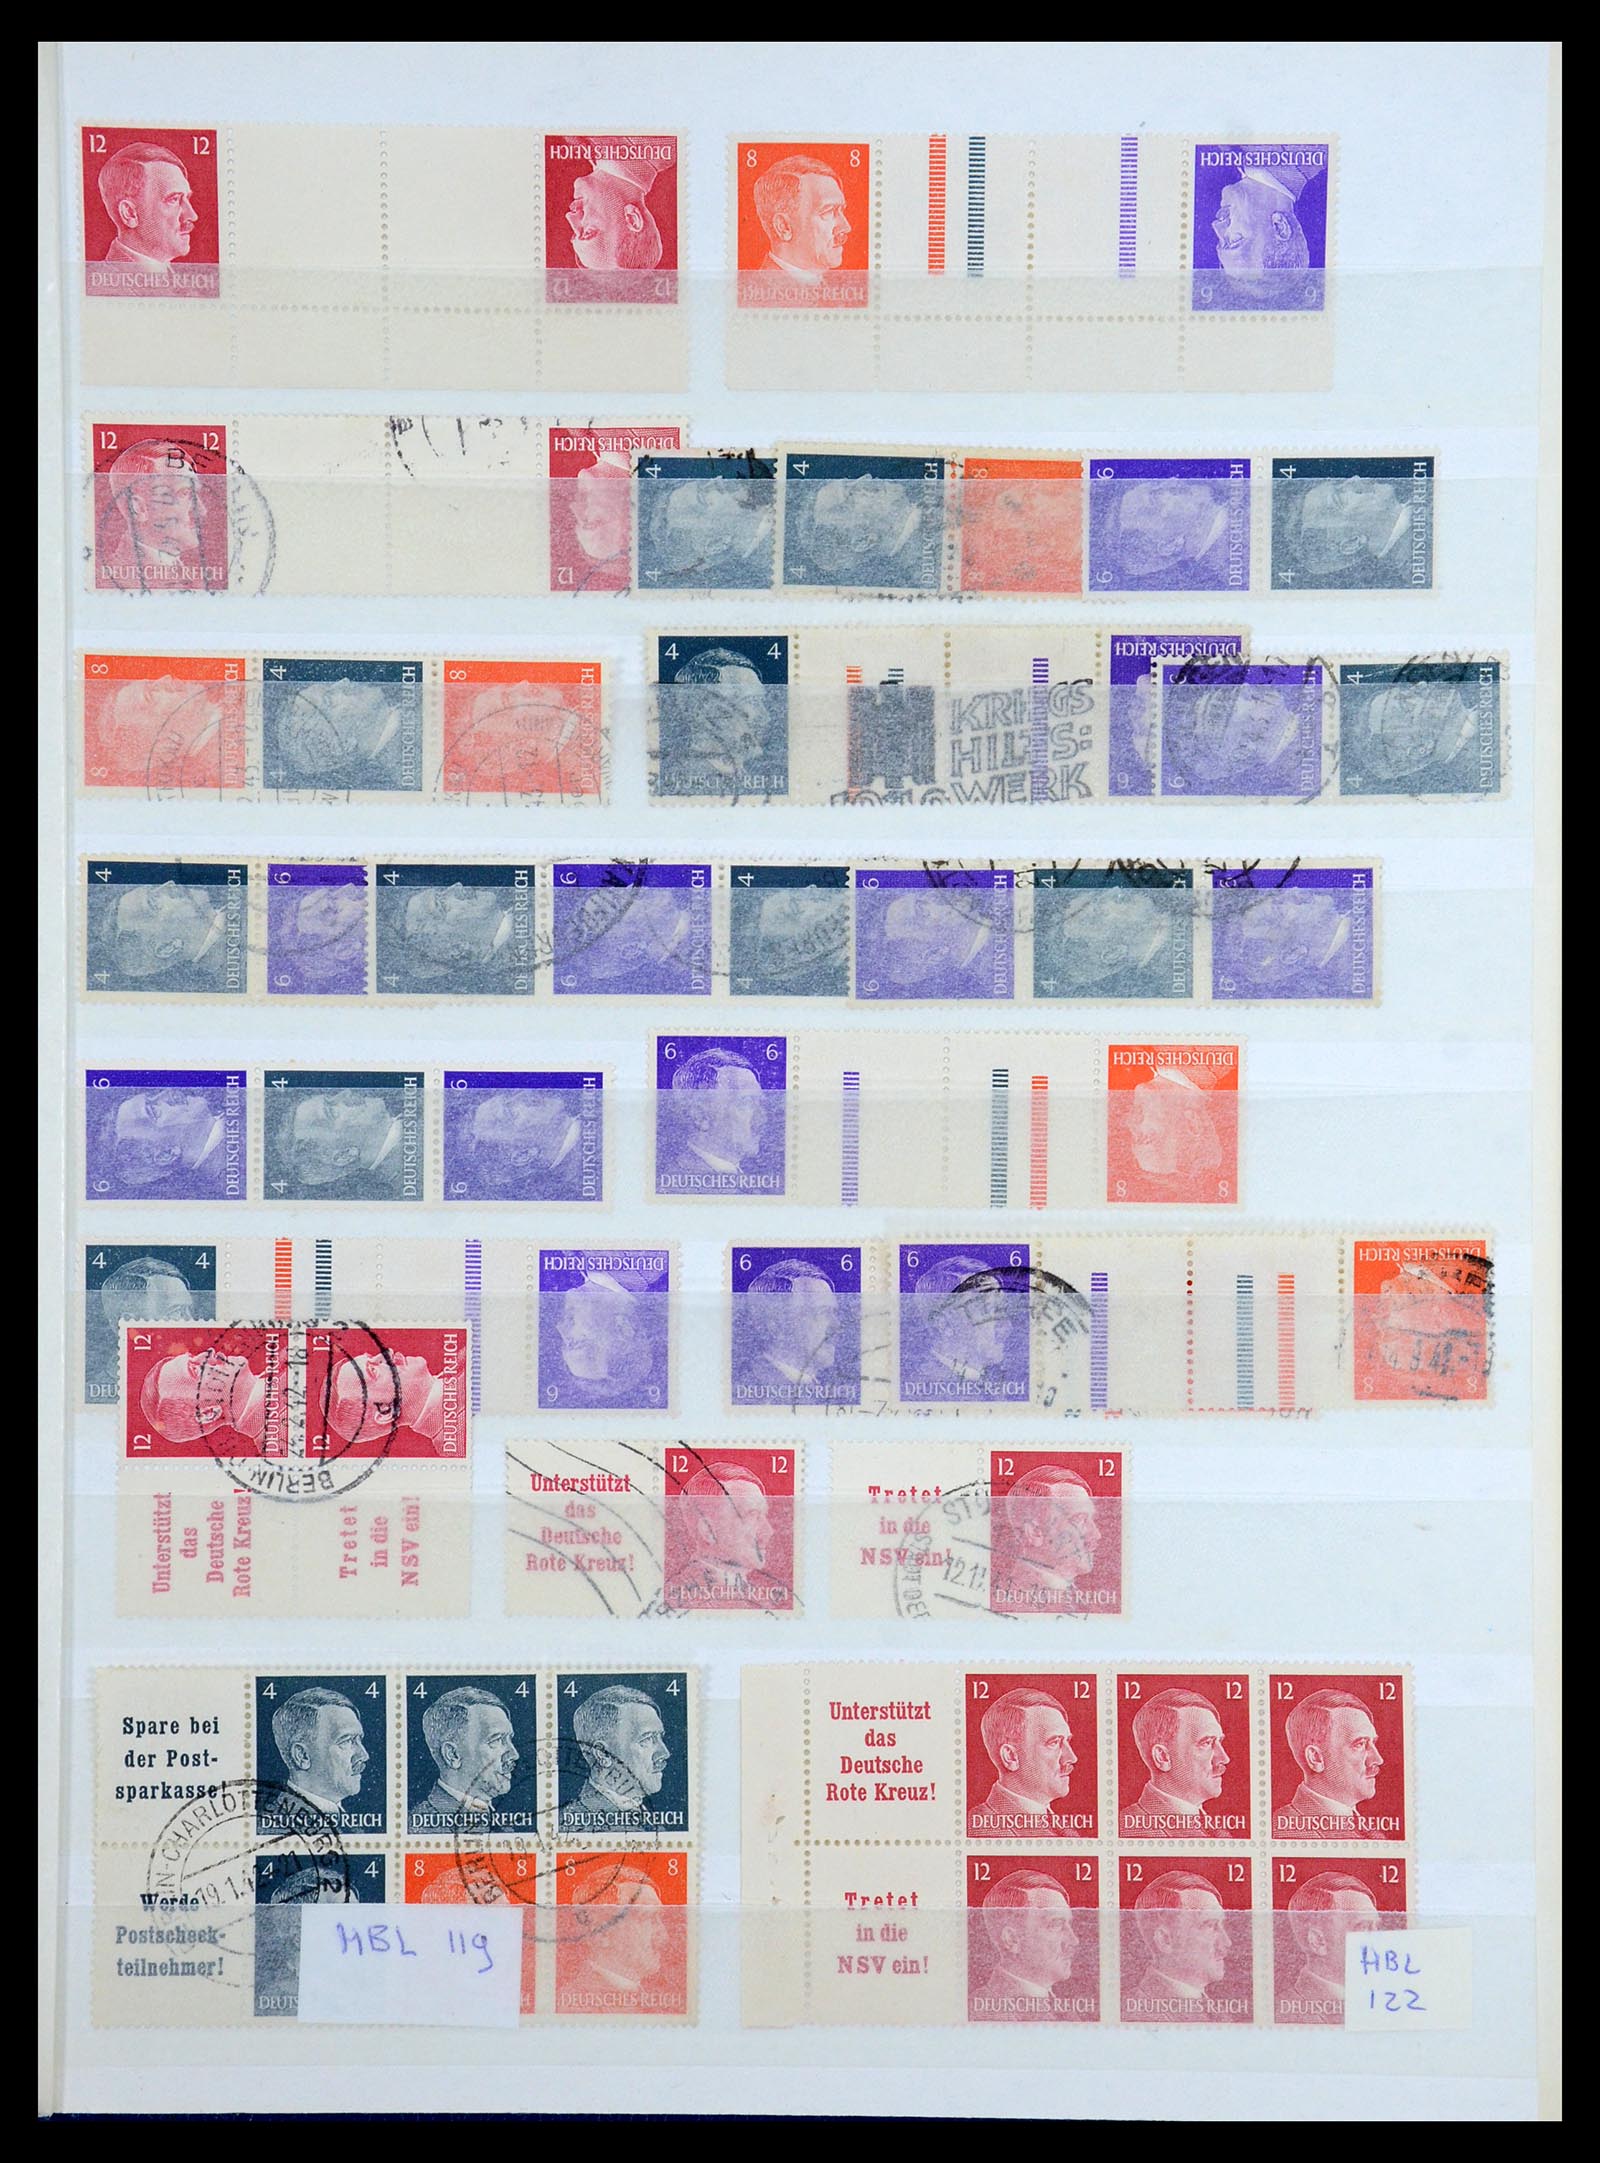 36370 024 - Stamp collection 36370 Germany combinations 1910-1980.